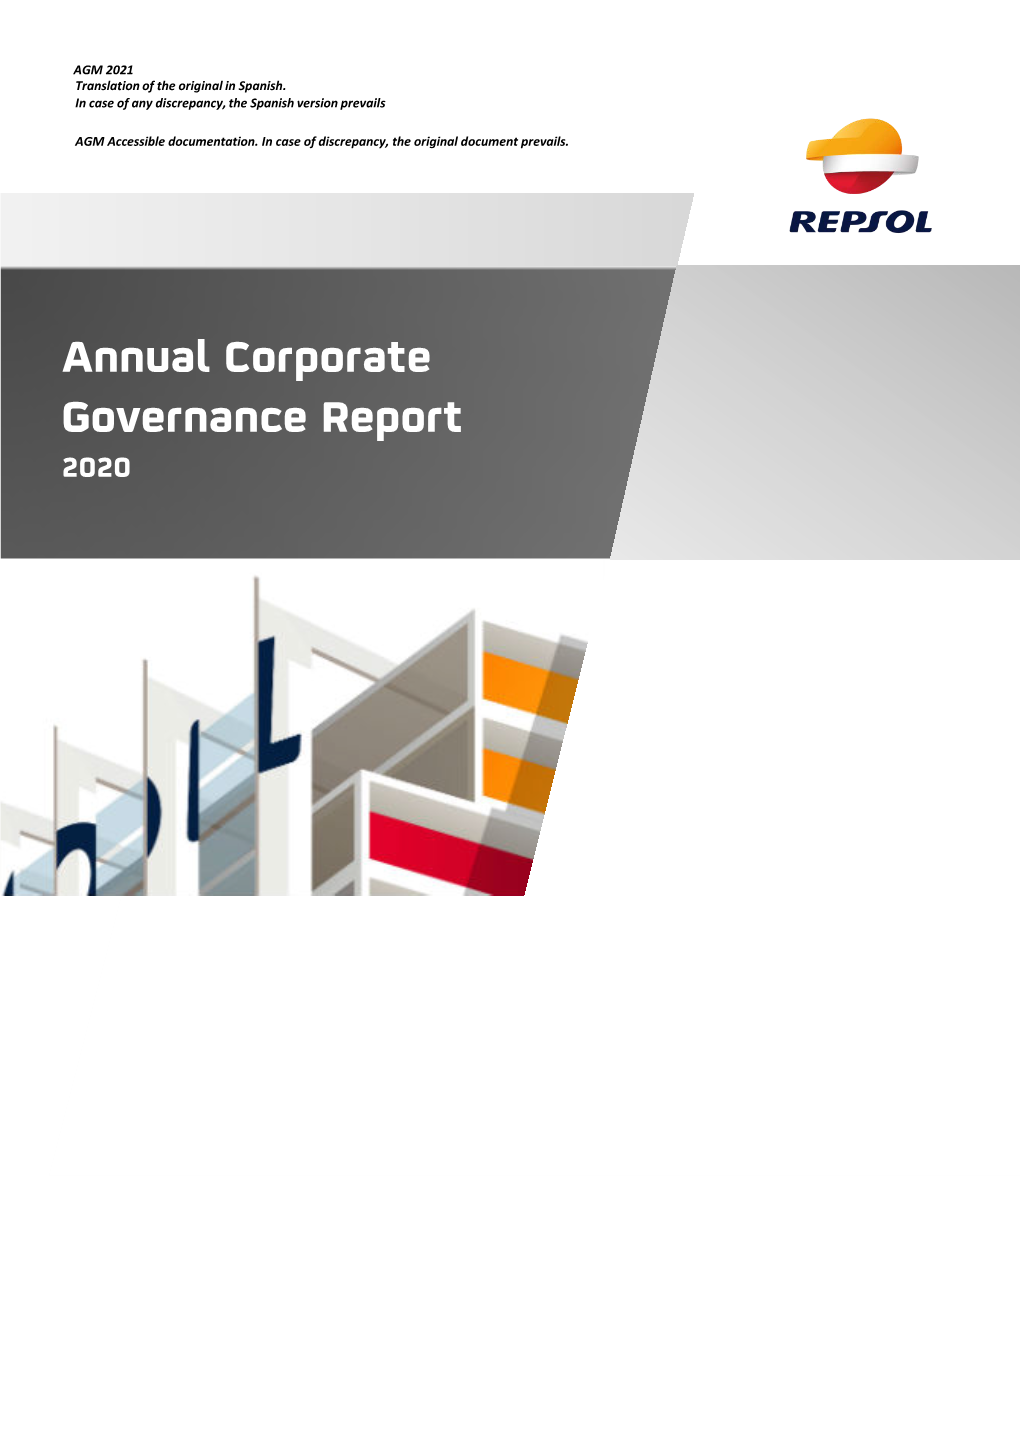 Annual Corporate Governance Report 2020 DETAILS of ISSUER